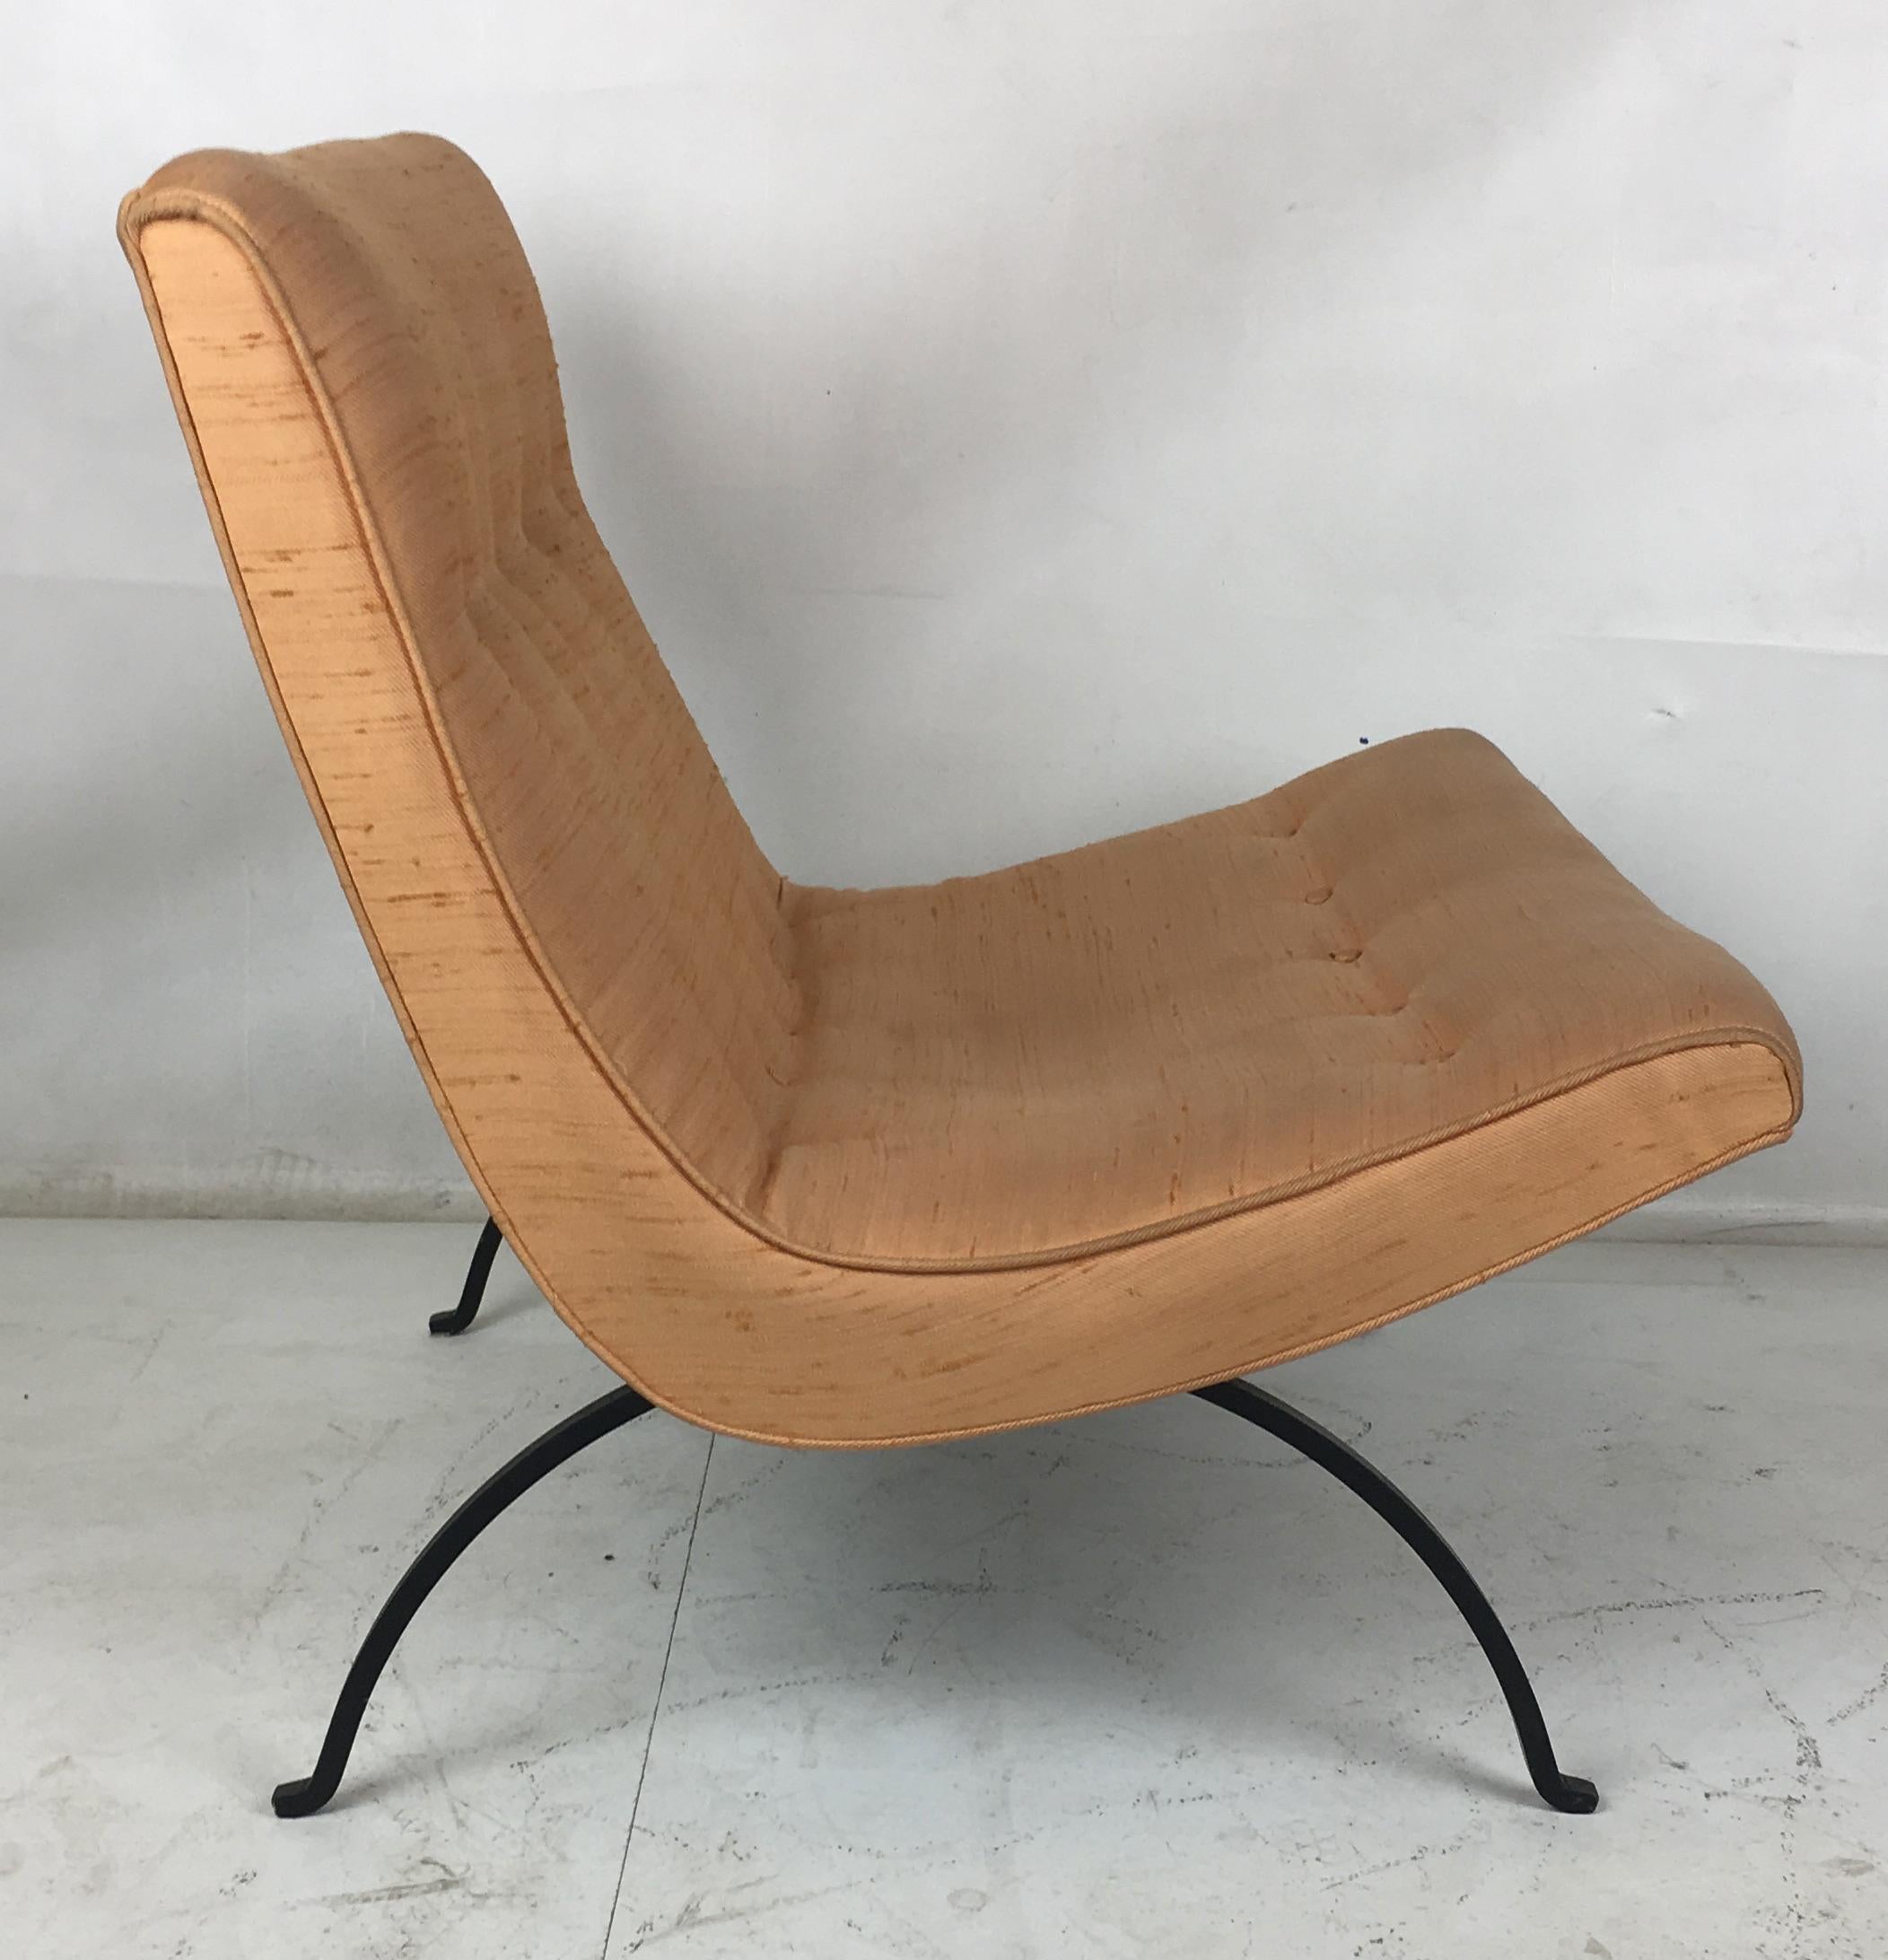 Early Scoop chair by Milo Baughman for Thayer Coggin with the early wrought steel type legs. It still wears its original cotton or silk upholstery that is a little worn and soiled. It's ready for something new.